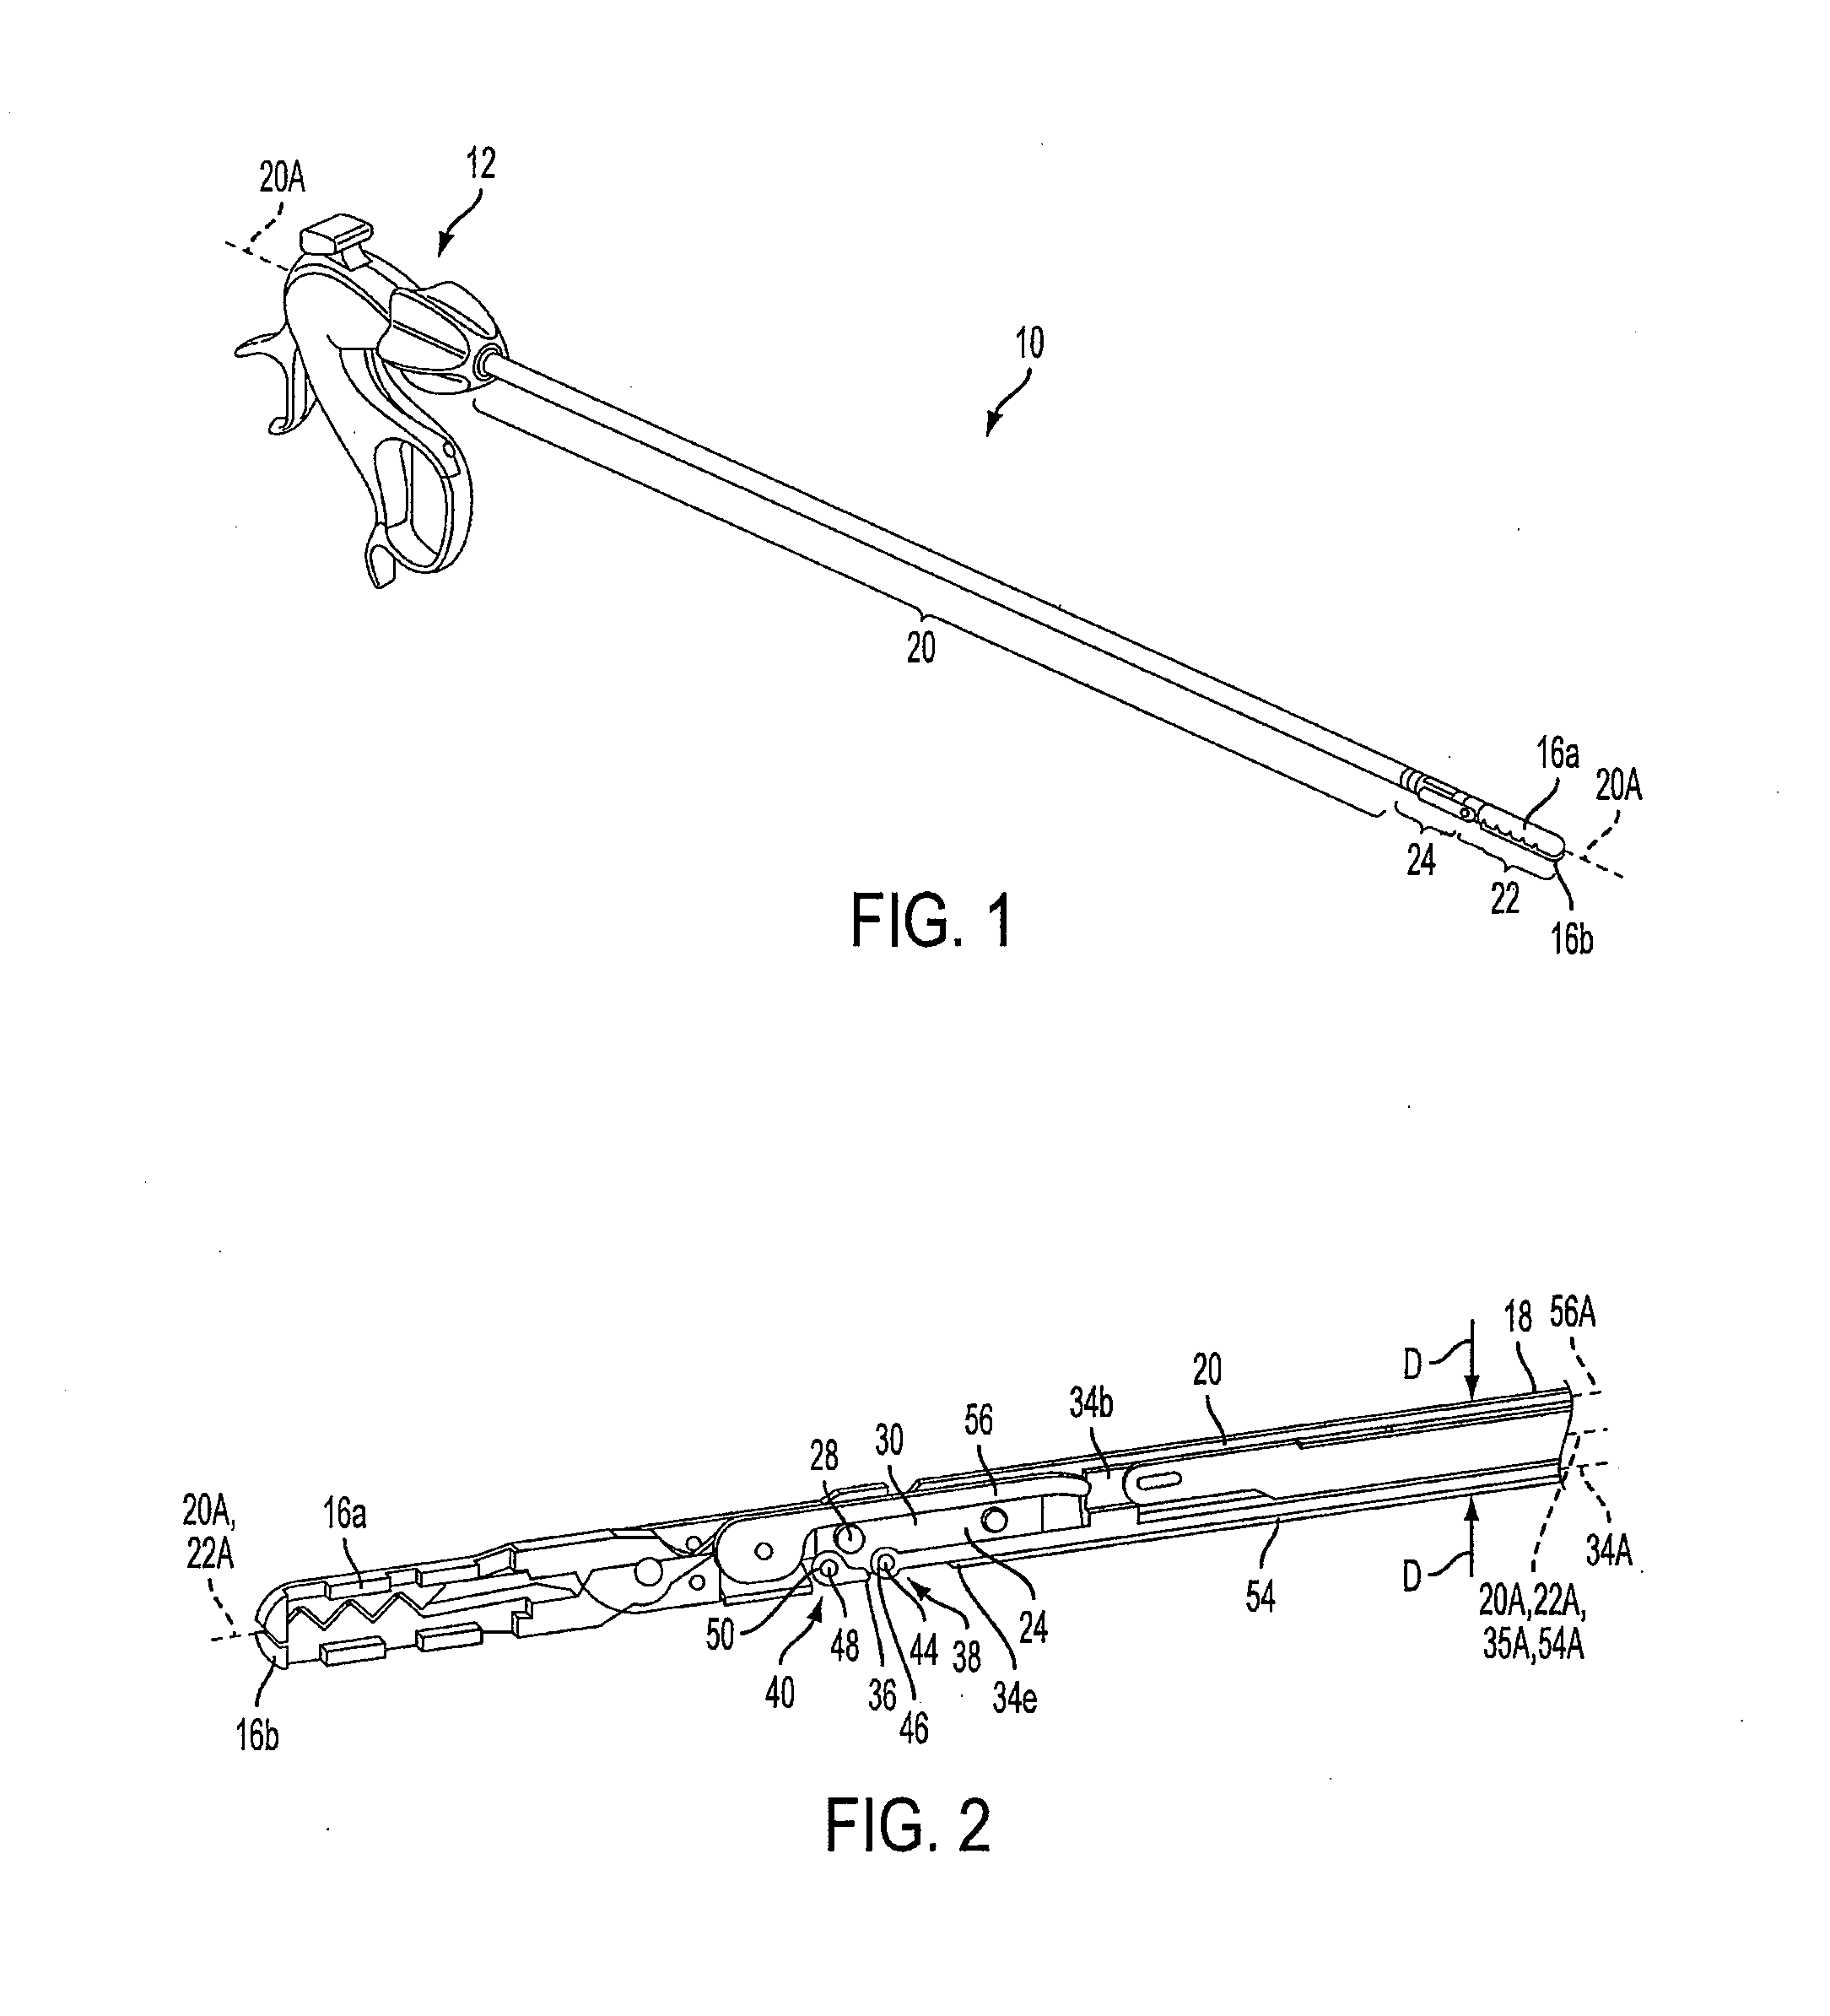 Laparoscopic devices with articulating end effectors